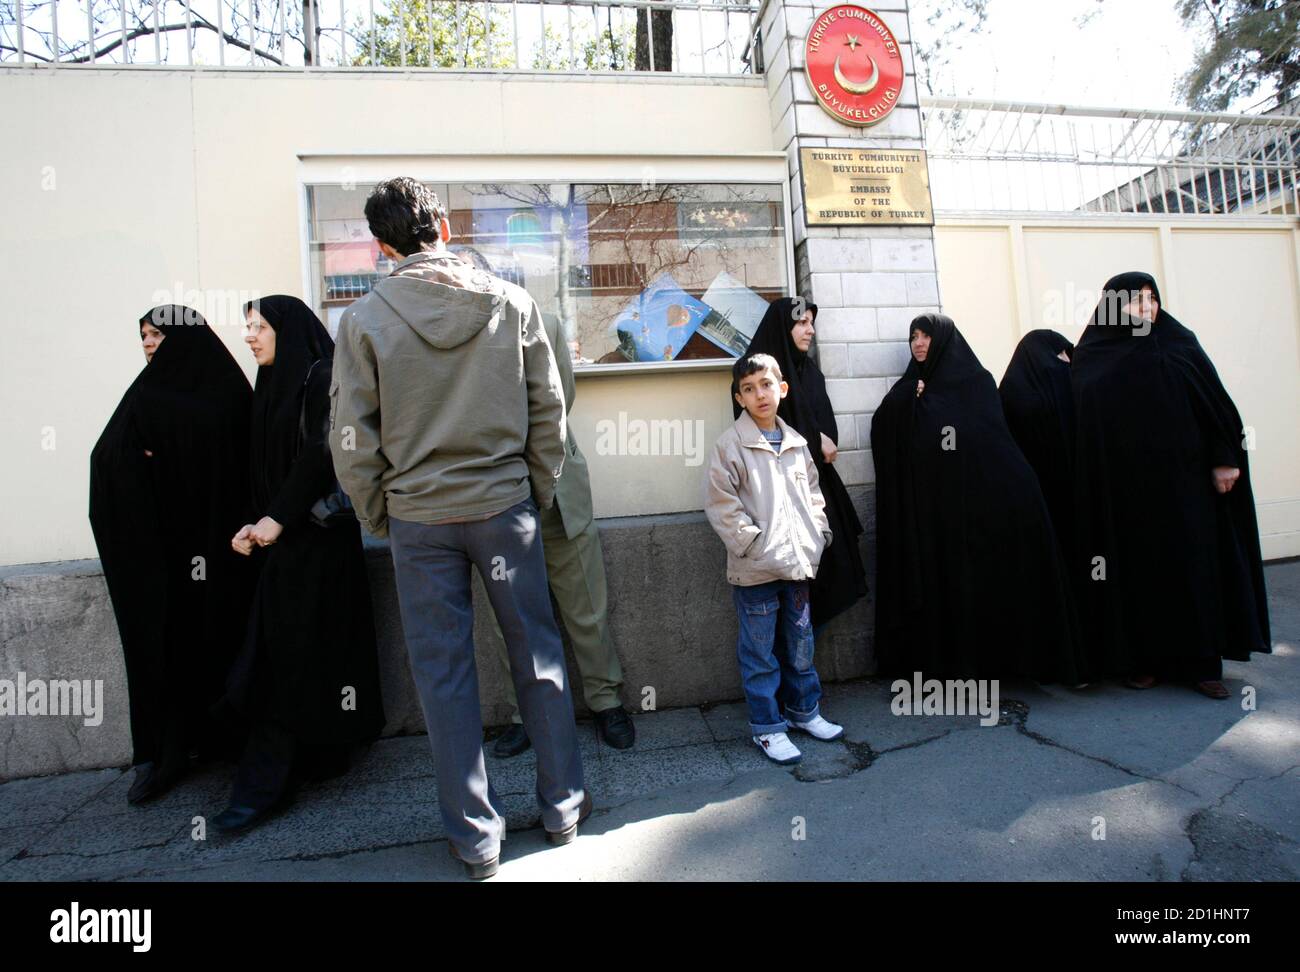 Family members of Iran's ex-deputy defense minister Ali Reza Asgari, including his wives (at R and 3rd R), gather in front of the Turkish Embassy in Tehran March 19, 2007. Asgari disappeared after checking into an Istanbul hotel on February 7.  REUTERS/Raheb Homavandi (IRAN) Stock Photo